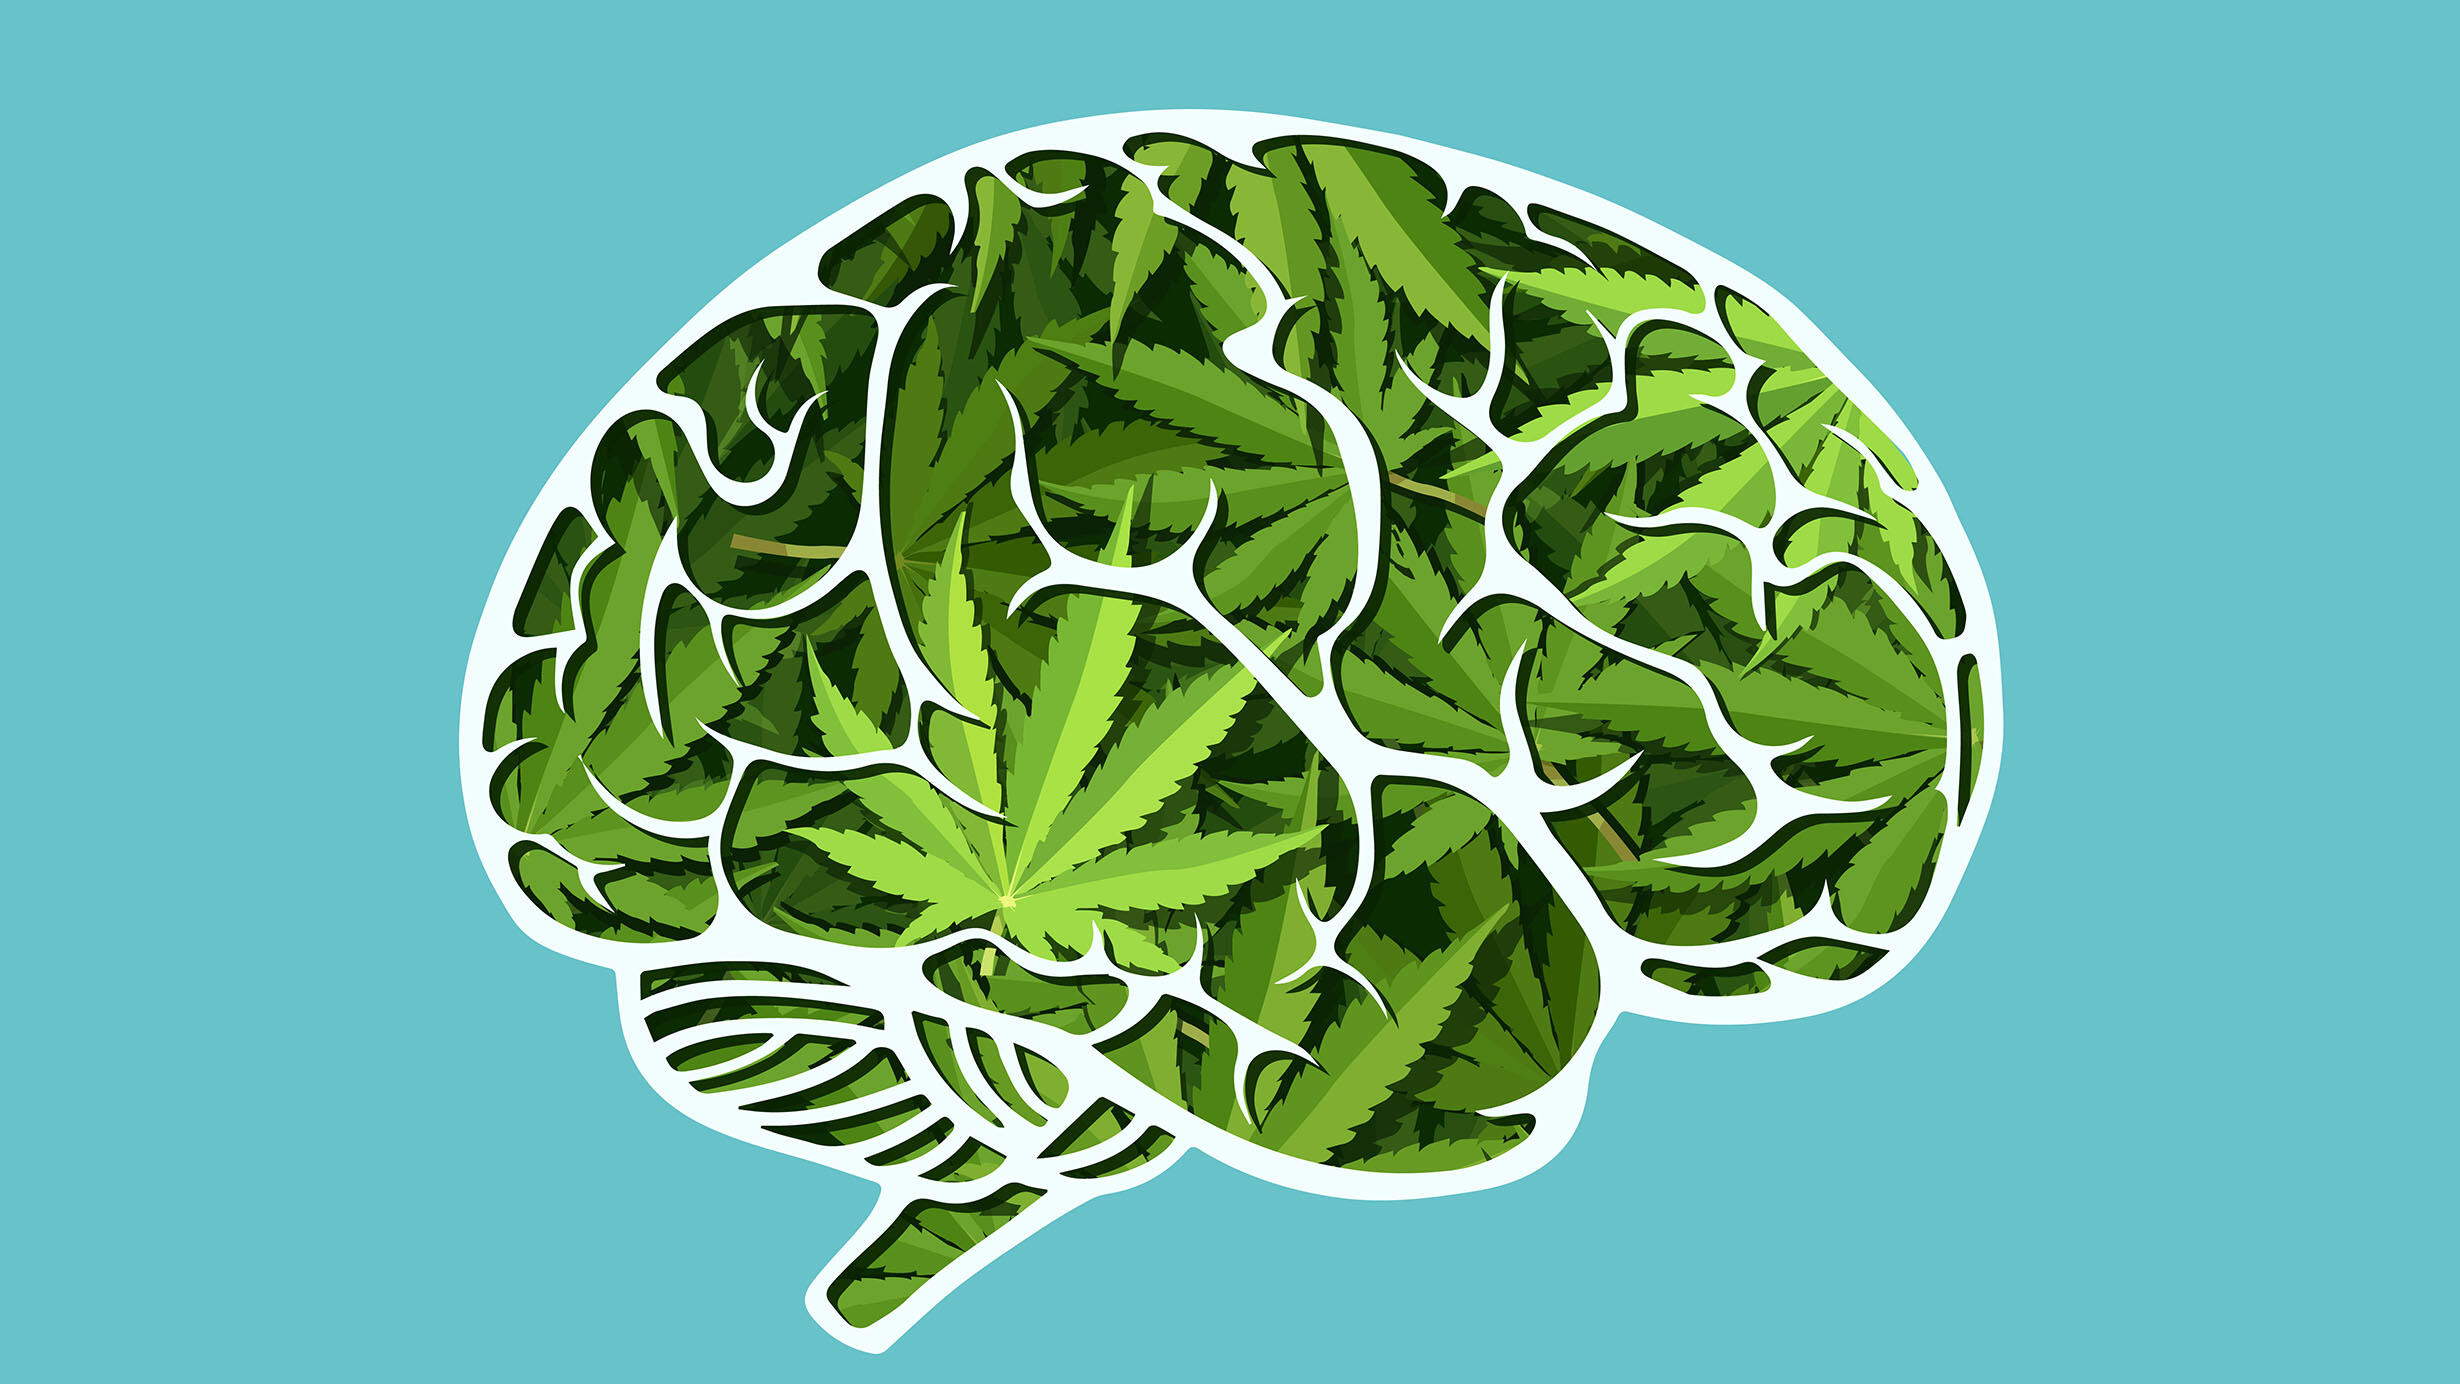 Artist rendering depicts the outline of a human brain, filled in with illustrations of cannabis leaves.